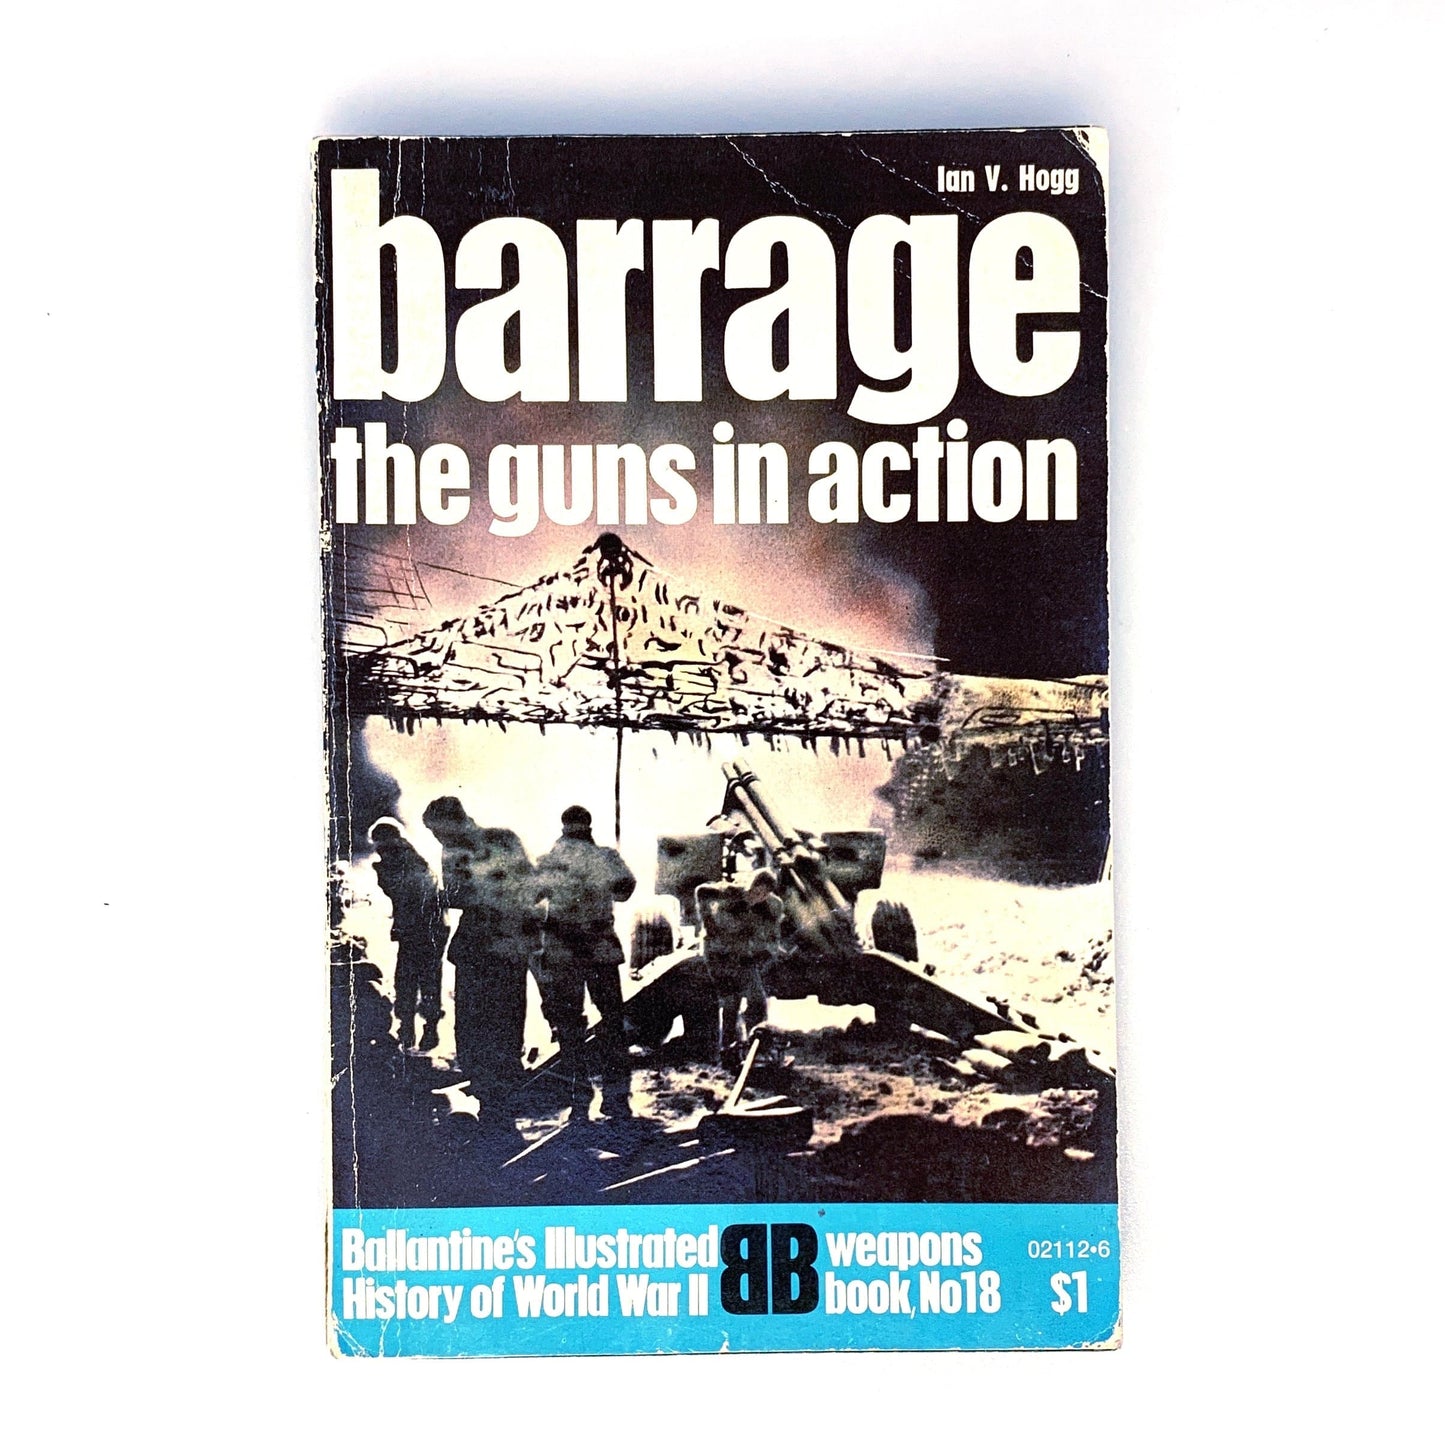 Ballantines Illustrated History of the Violent Century - Barrage Guns In Action